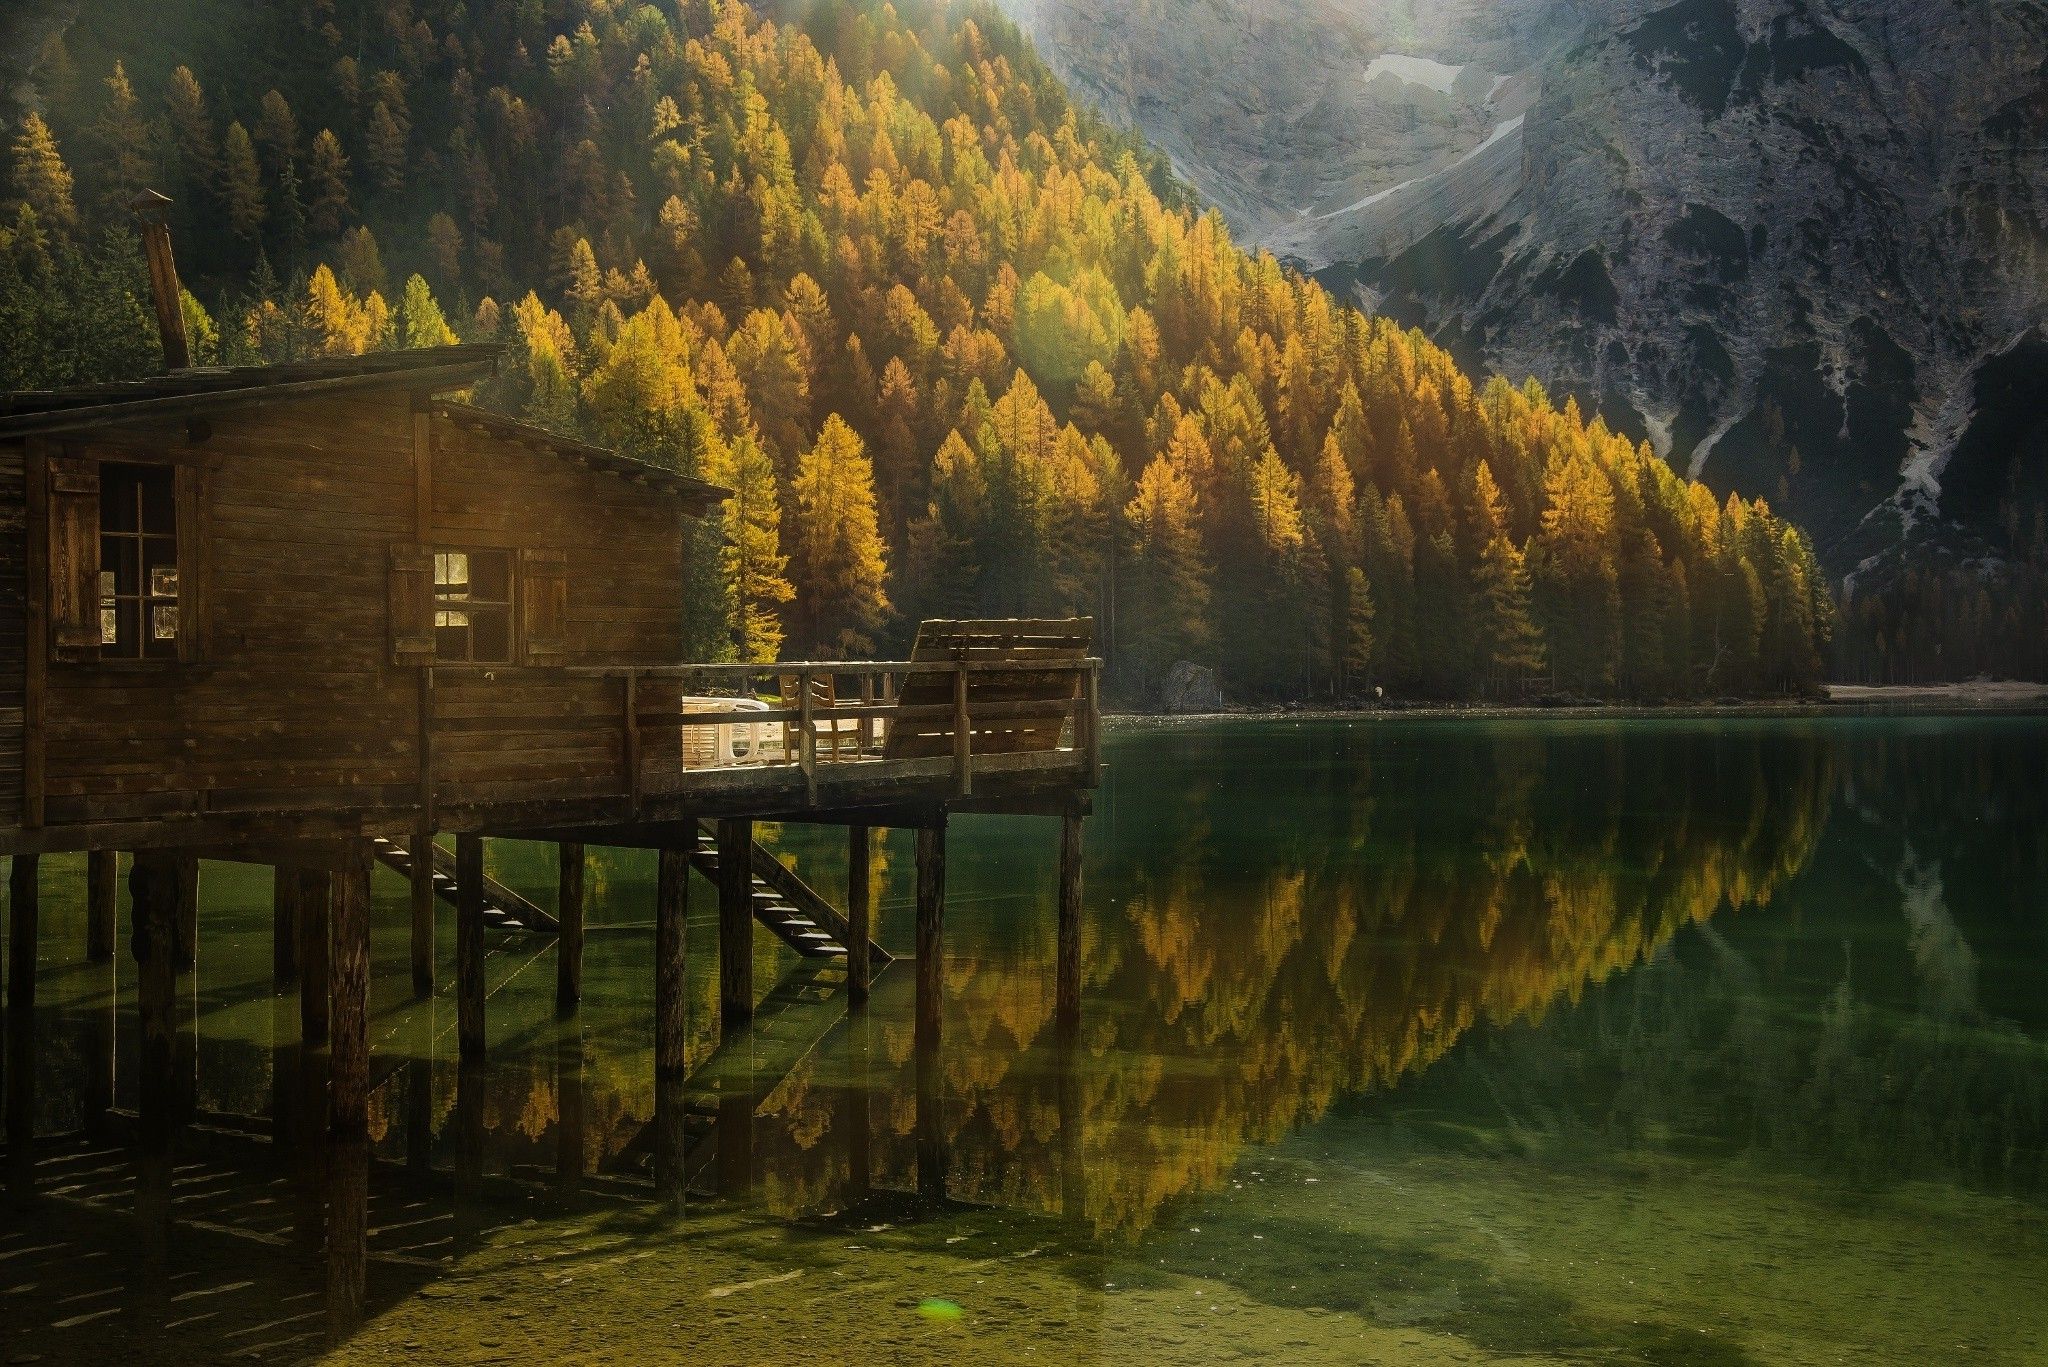 landscape, Nature, Fall, Forest, Mountain, Lake, Cabin, Reflection